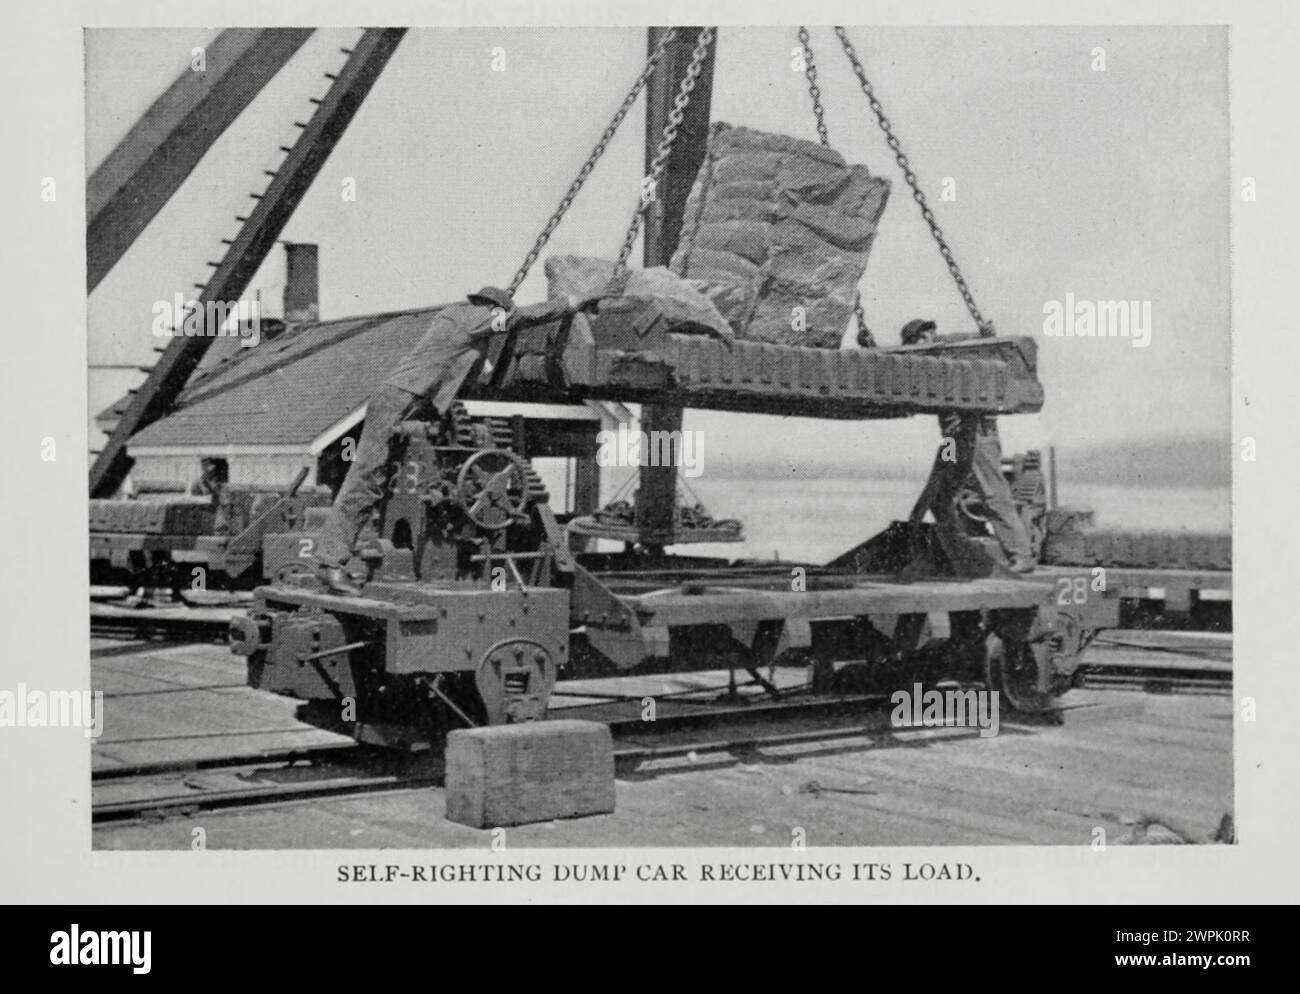 Self righting dump car receives its load from the Article AN EXAMPLE OF SUCCESSFUL JETTY CONSTRUCTION ON THE PACIFIC COAST. by Gwynn A. Lyell from The Engineering Magazine Devoted to Industrial Progress Volume XV 1898 The Engineering Magazine Co Stock Photo